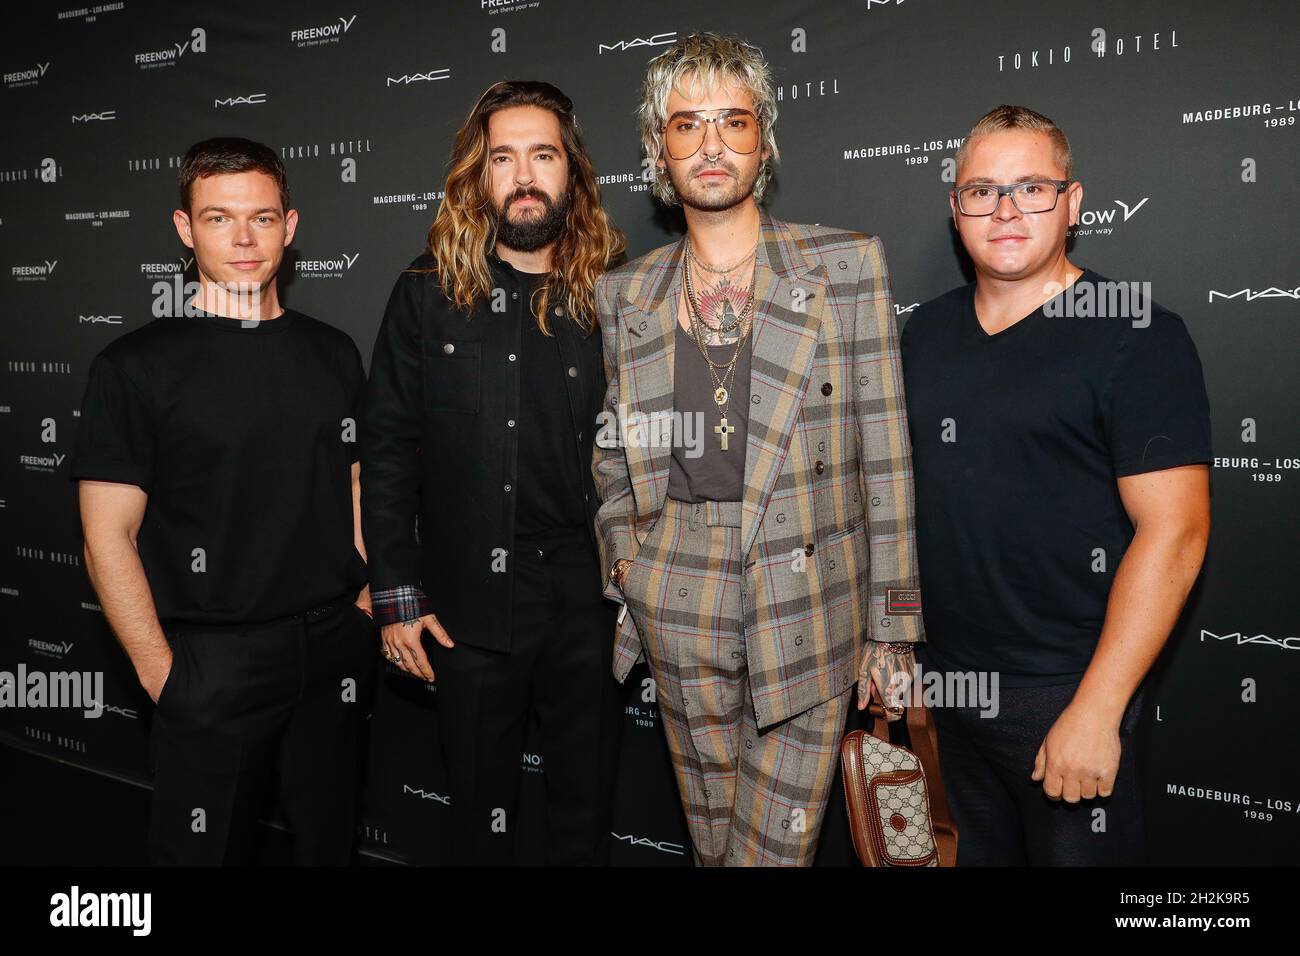 Berlin, Germany. 22nd Oct, 2021. Georg Listing (l-r), Tom Kaulitz, Bill Kaulitz and Gustav Schäfer arrive at the Tokio Hotel event in Berlin. On Friday Tokio Hotel will release the new single 'Here comes The Night' and at the same time this will be celebrated with an award ceremony in Berlin. Credit: Gerald Matzka/dpa/Alamy Live News Stock Photo